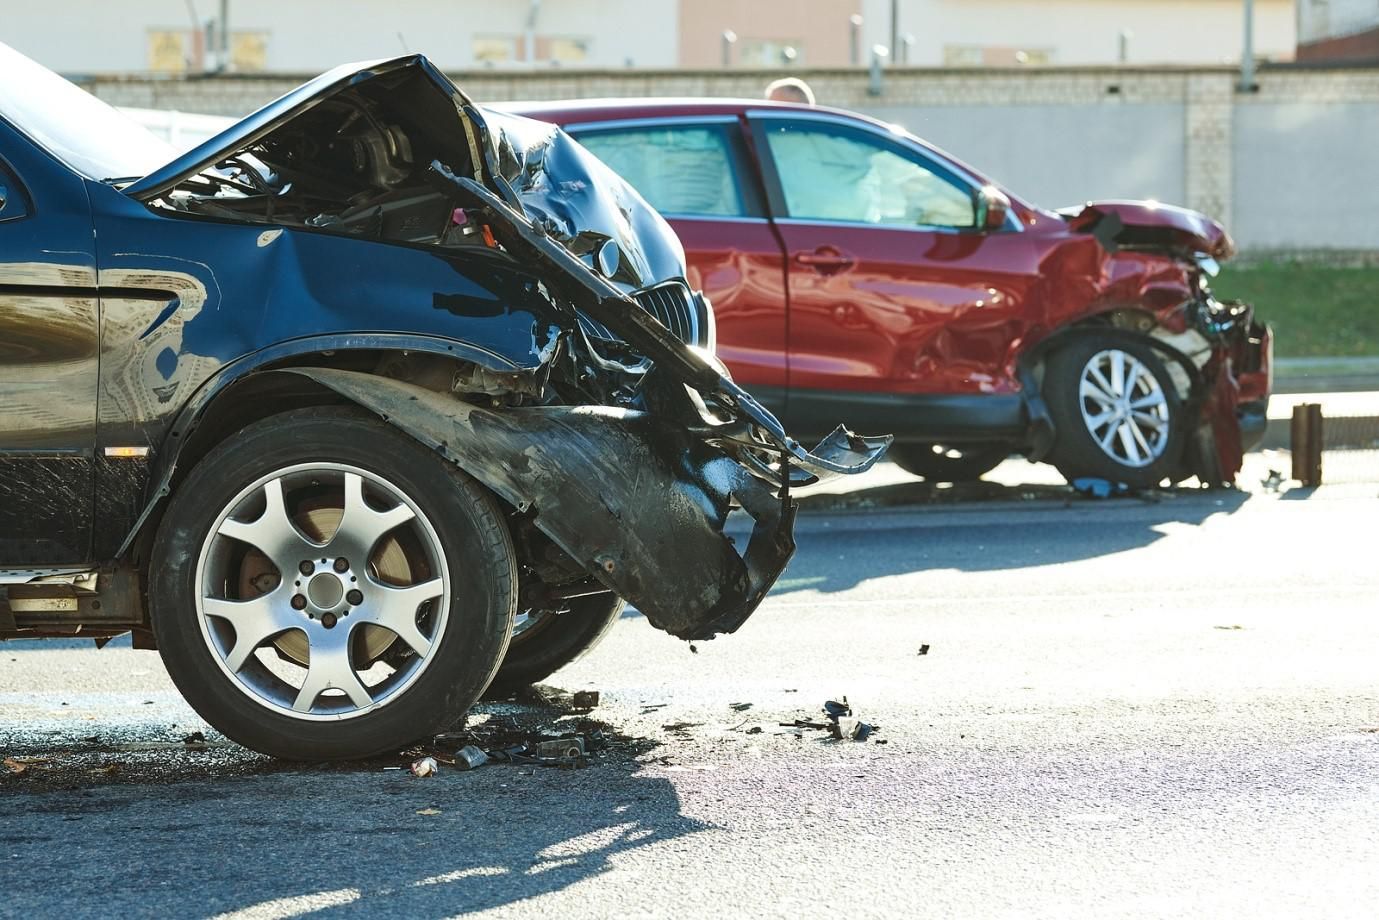 How to Deal with a Motor Vehicle Accident: